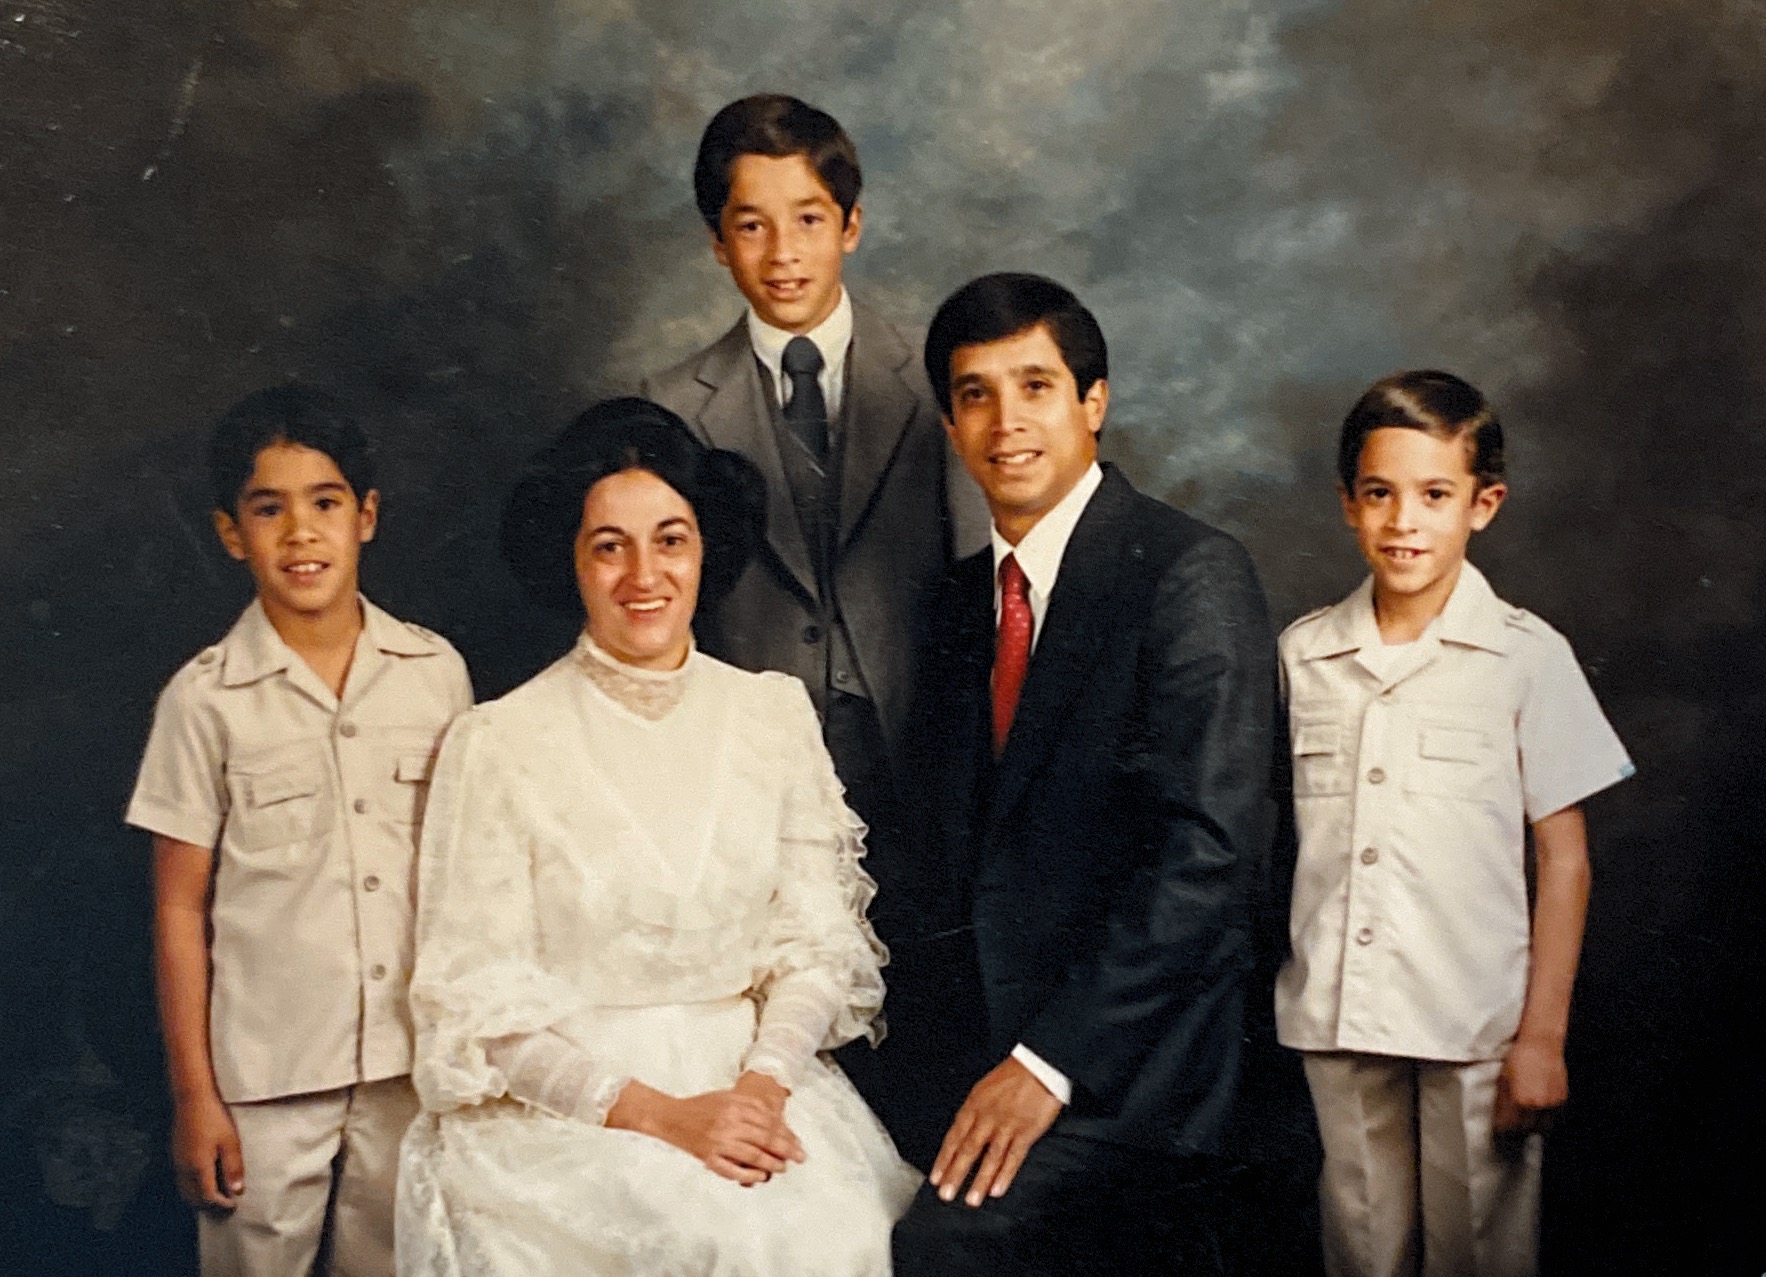 Job and Susana with their kids December 1984